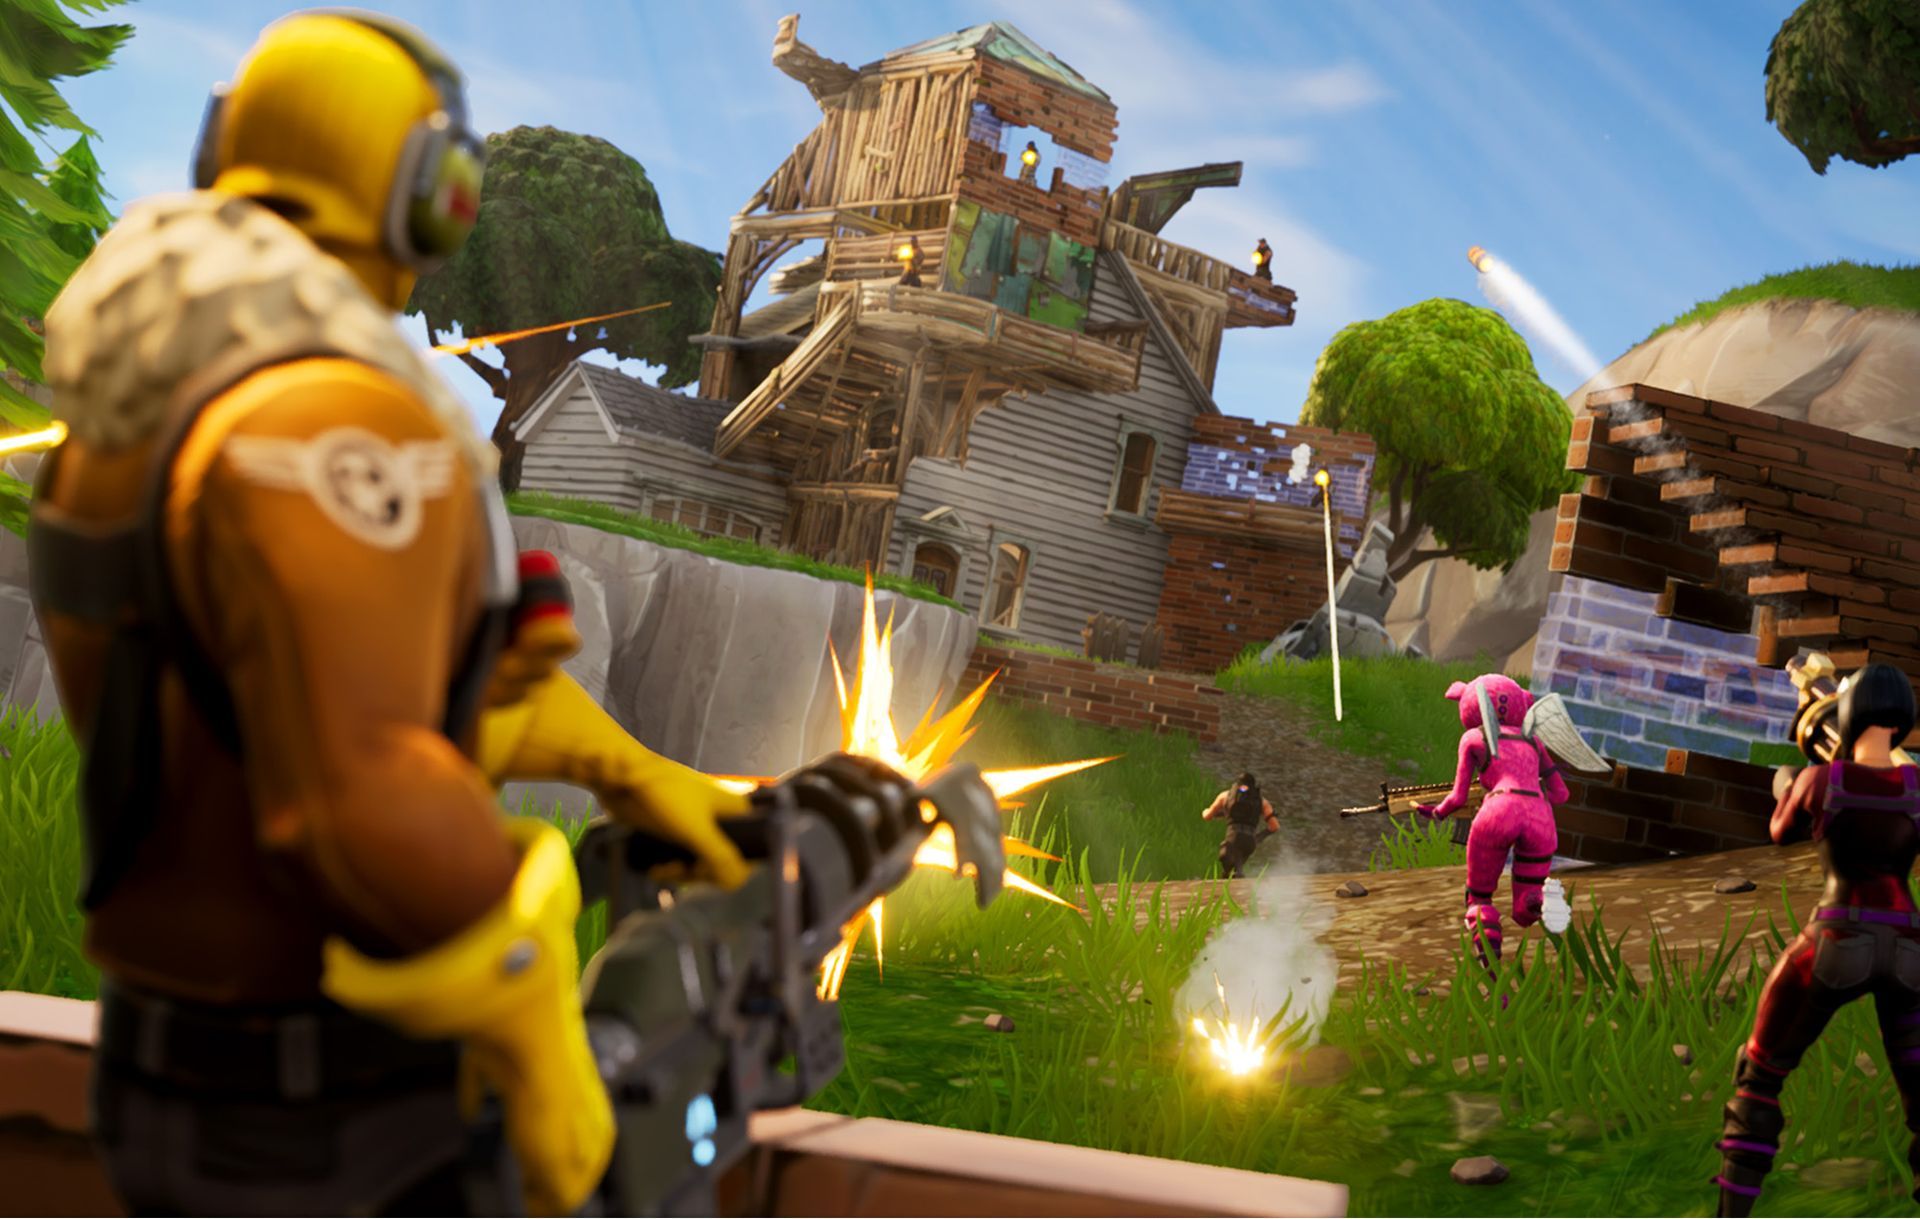 In this article, we are going to go over how to fix Profile query failed Fortnite error, so you can enjoy the popular battle royale game without any problems.